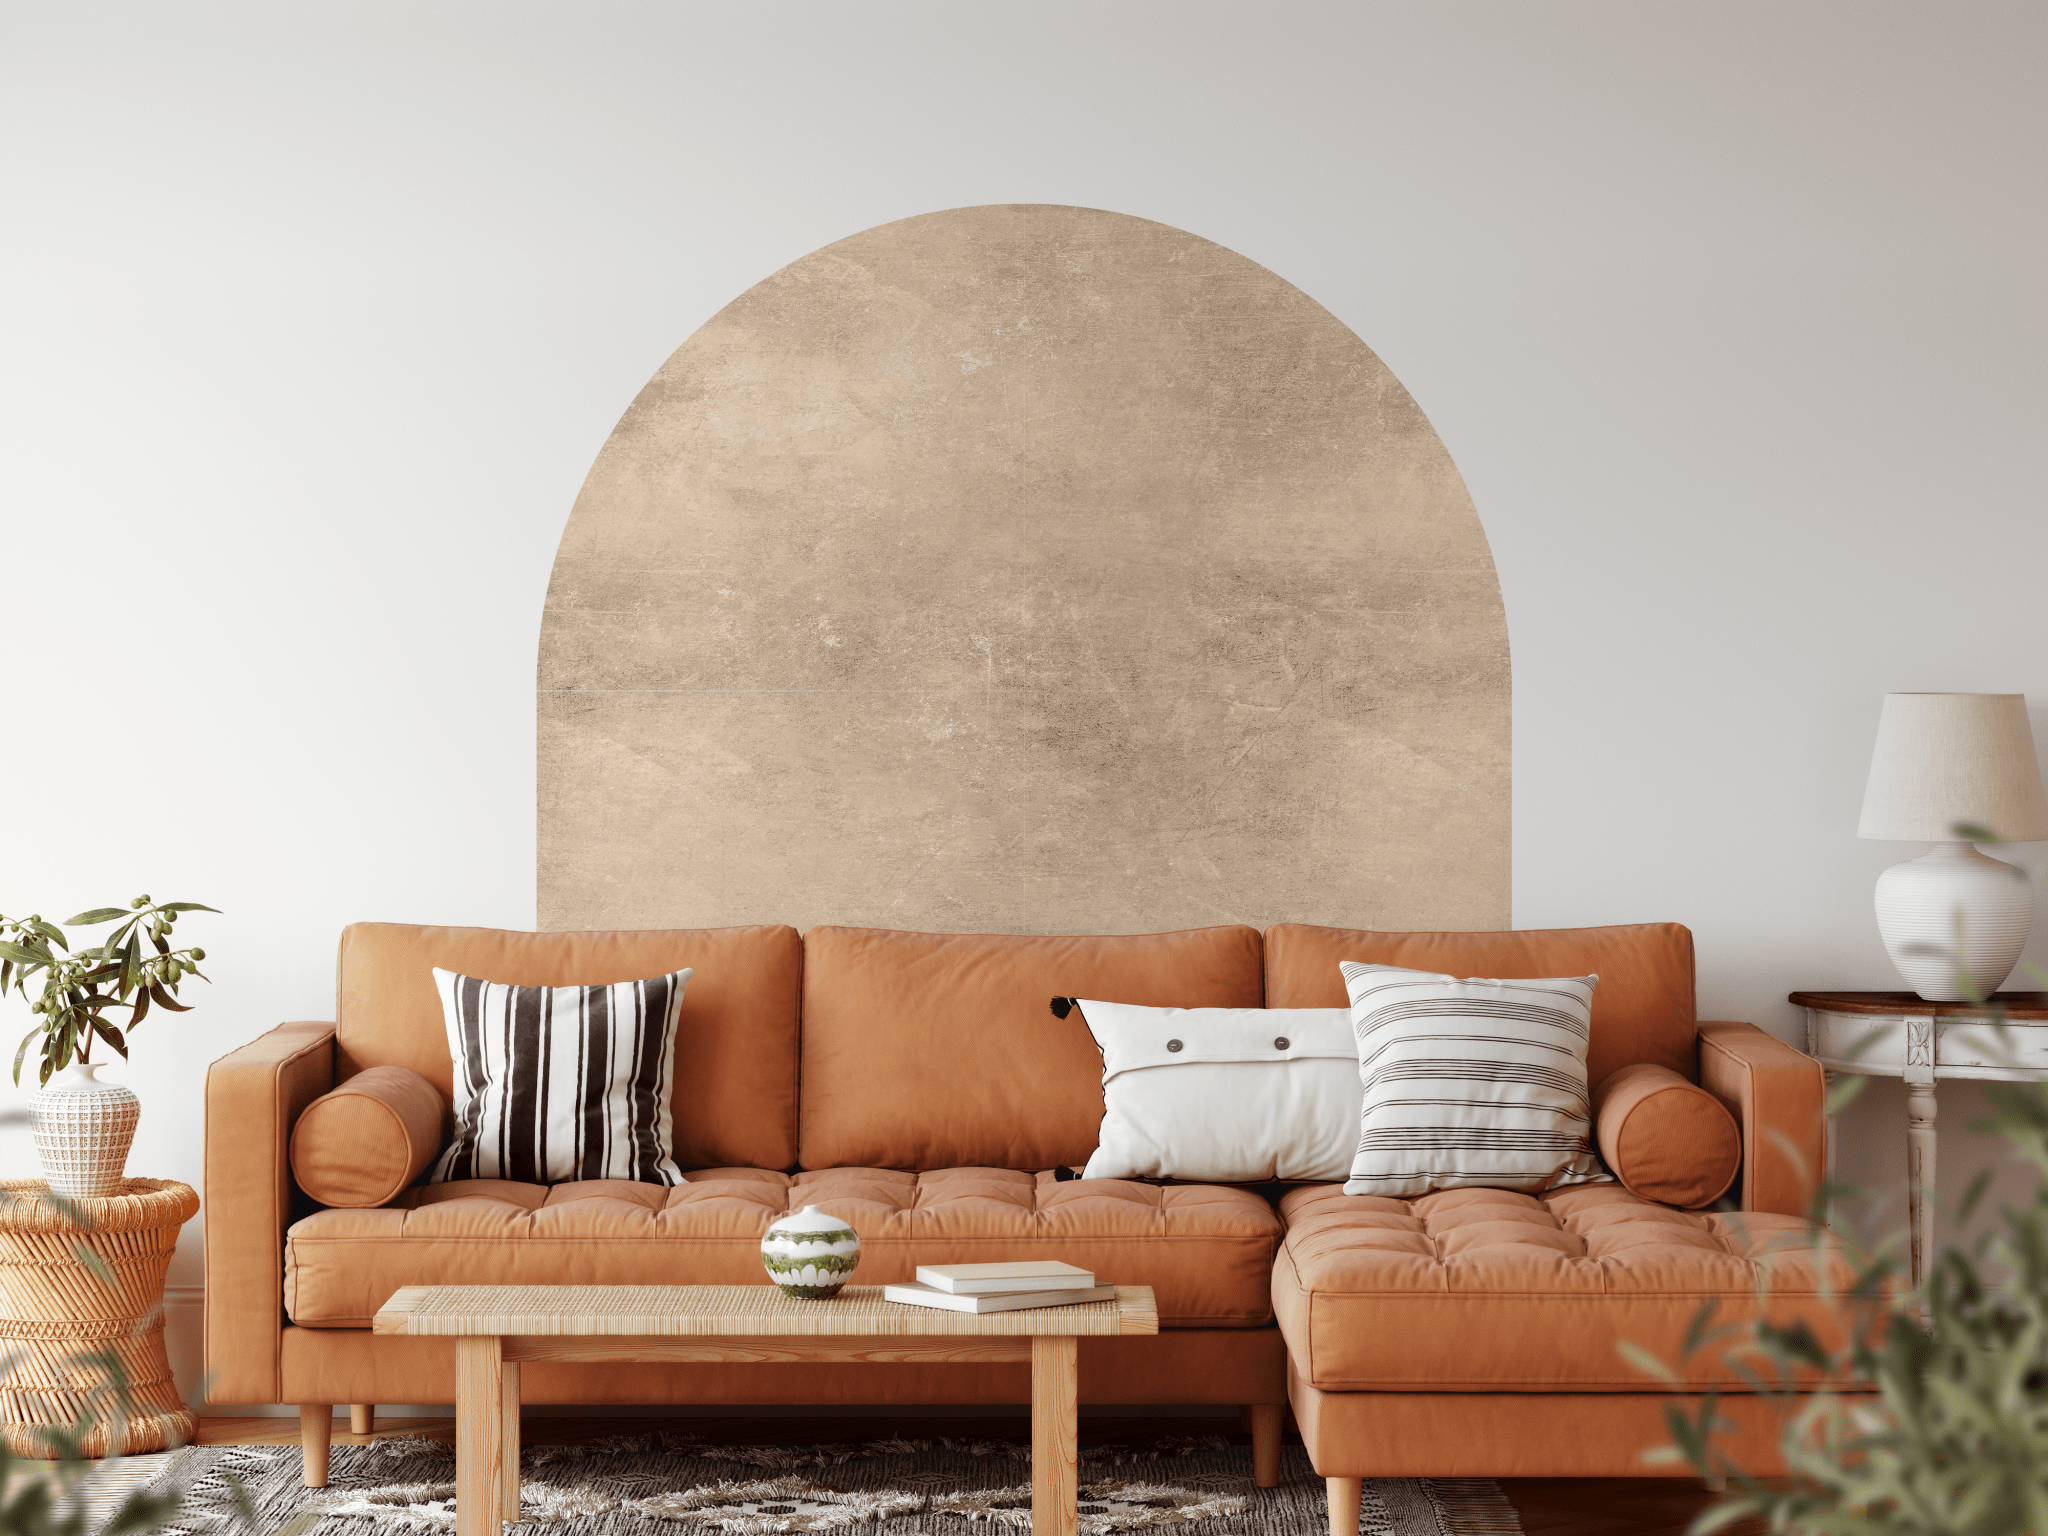 Large textured wall arch for bohemian home decor